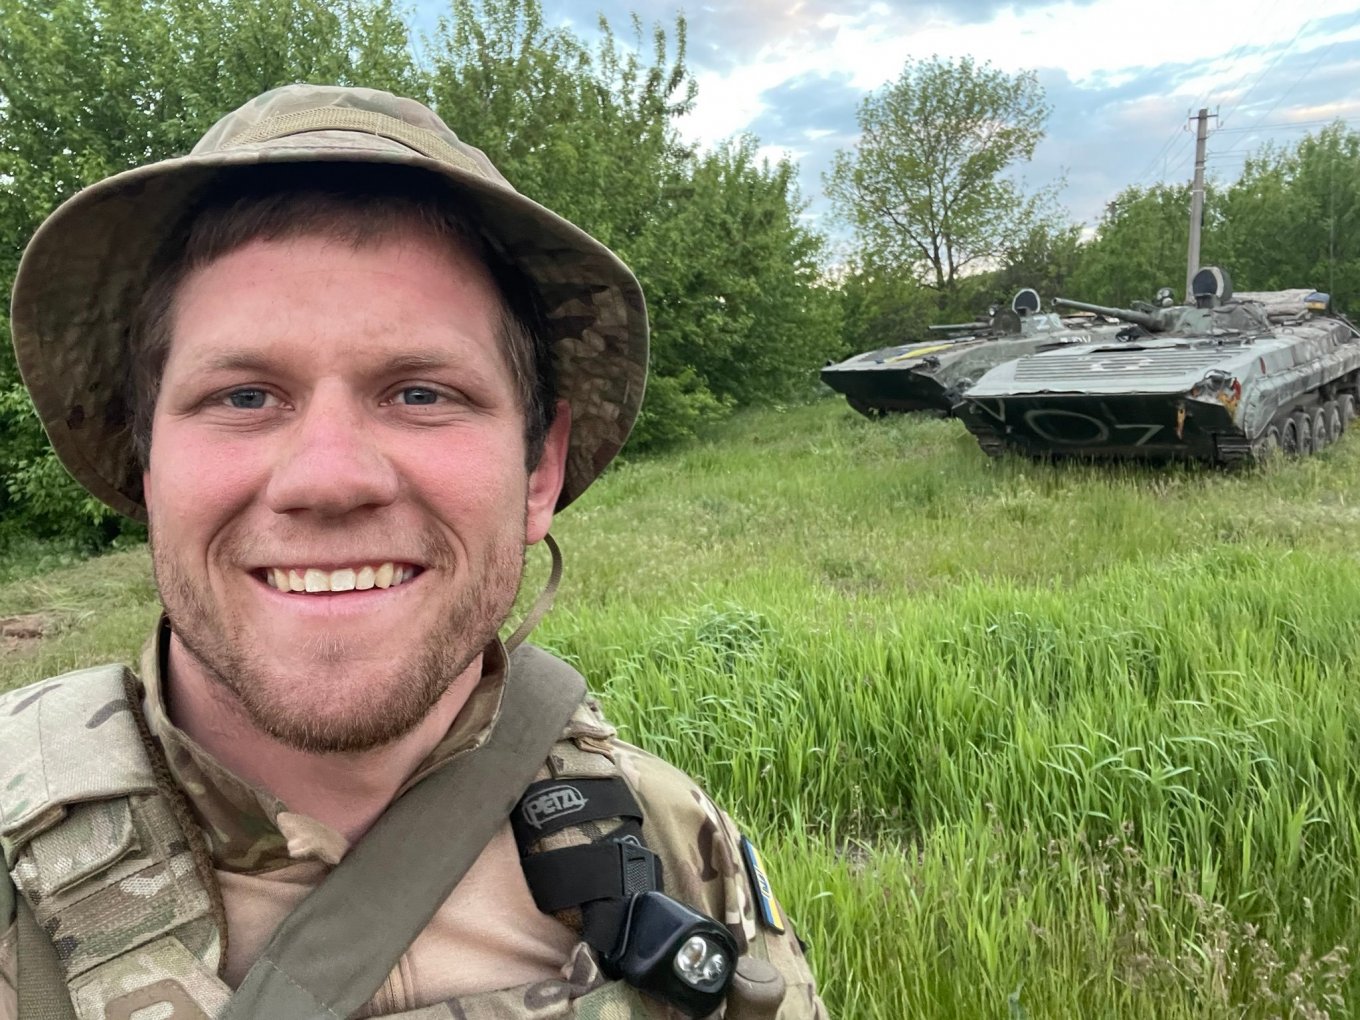 Ukrainian forces captured a pair of Russian BMP-1 IFVs at the same time. It is notable that in recent times BMP-1 have appeared more and more, whilst during the earlier Russian campaigns they were uncommon, Defense Express